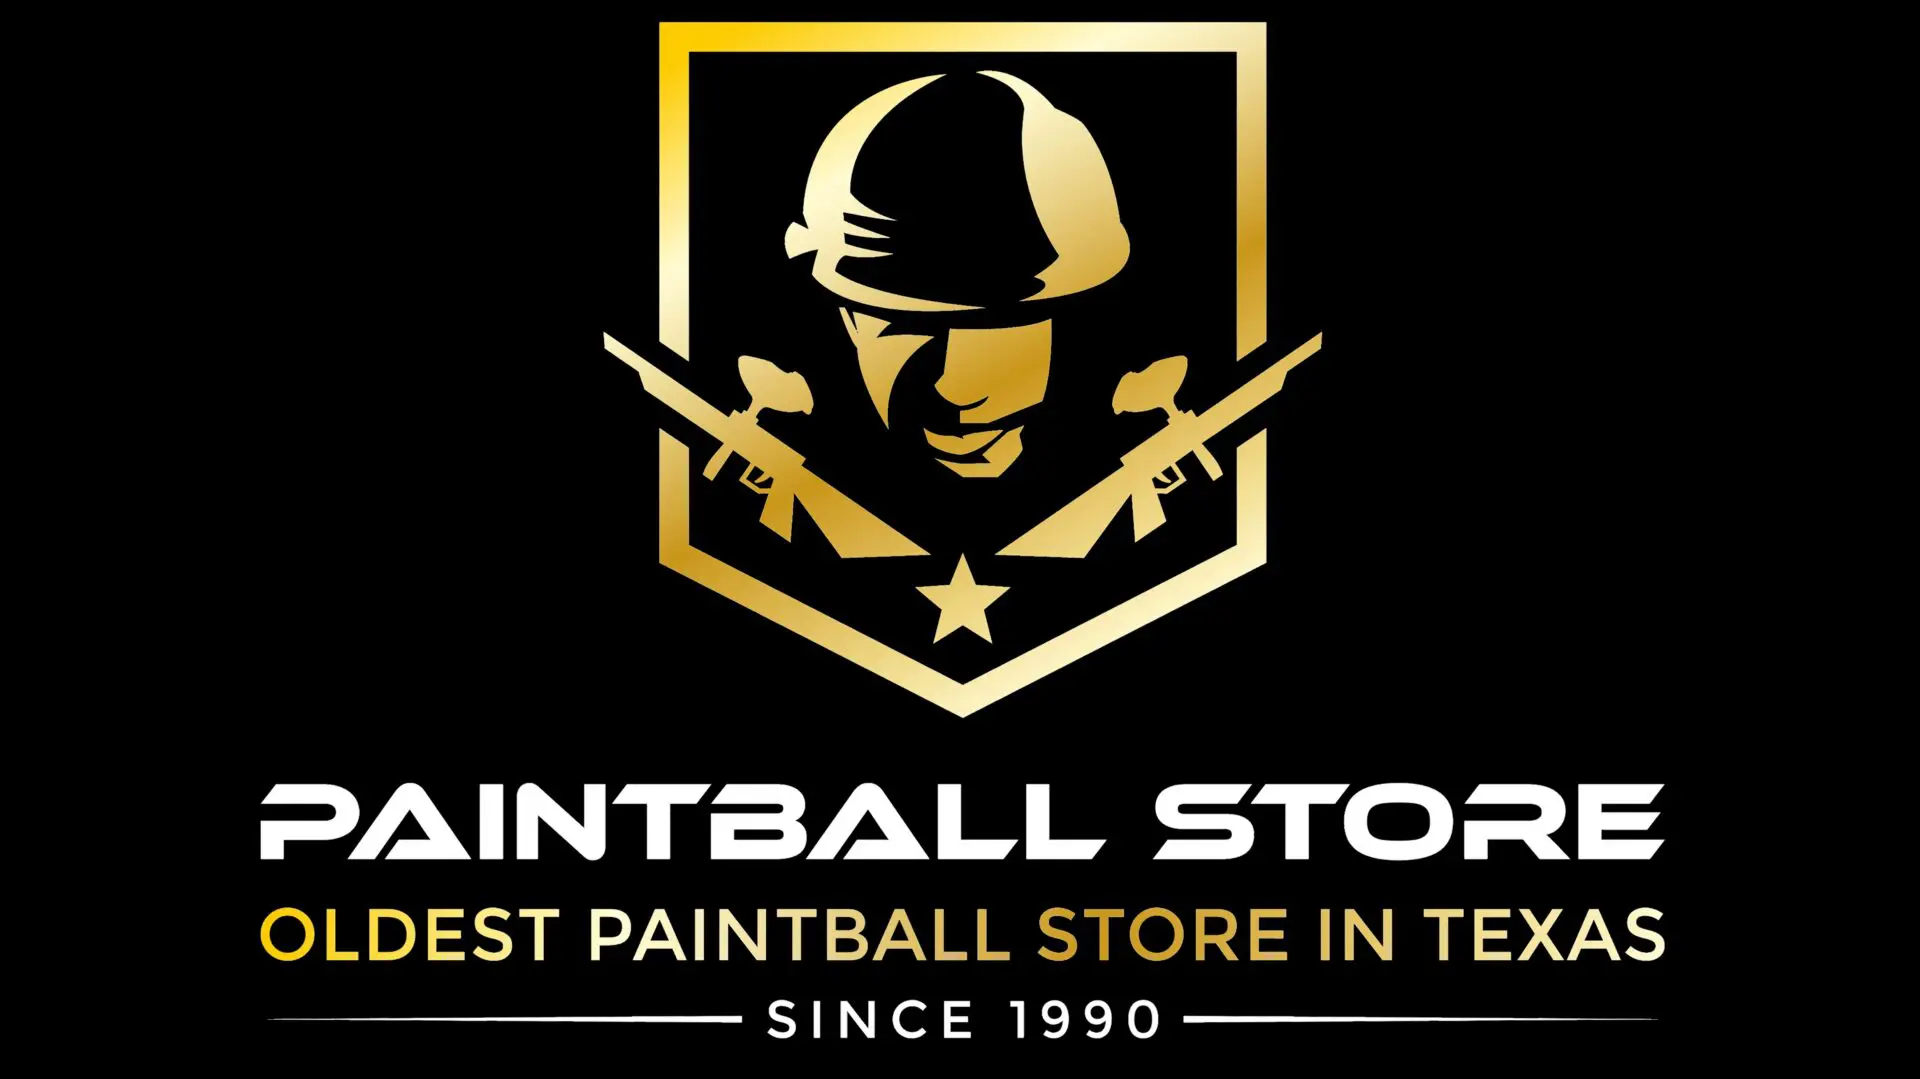 A gold and black logo for the paintball store.